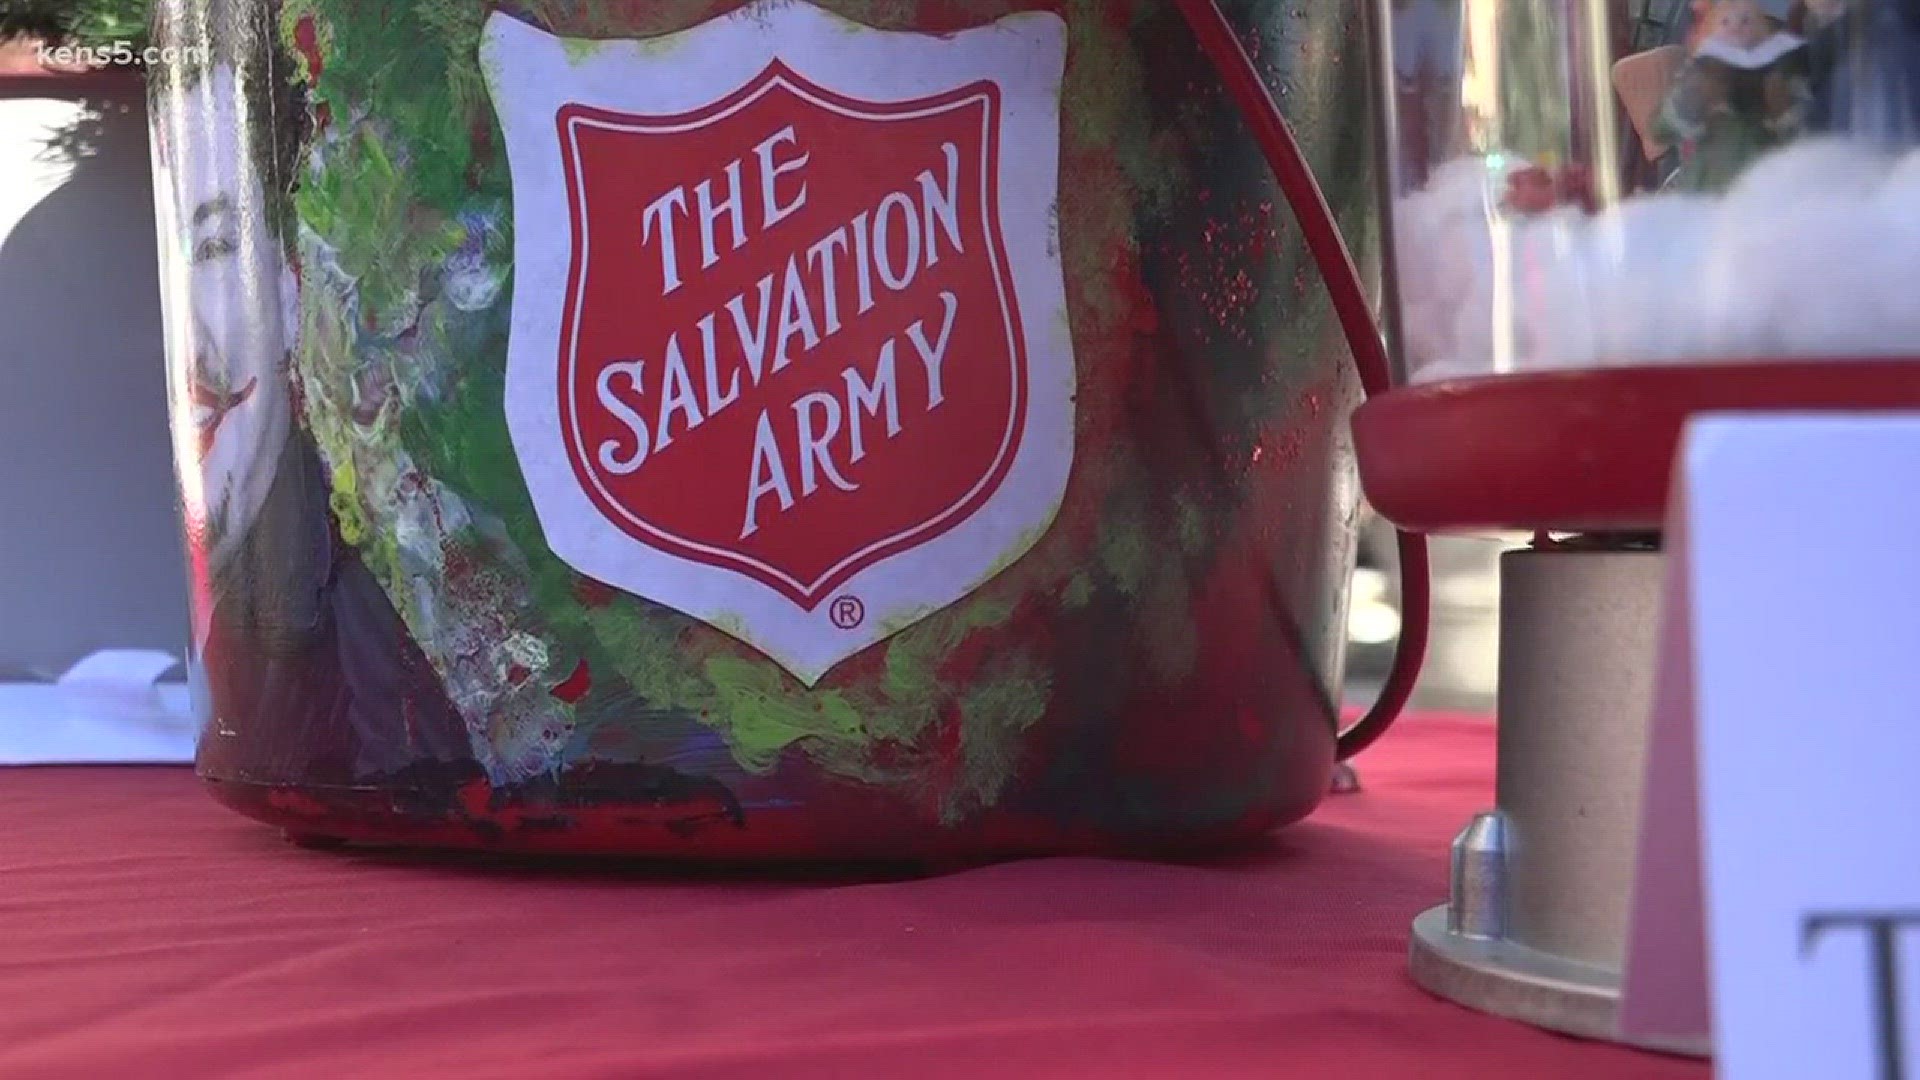 Bells continue ring and raise money the Army |